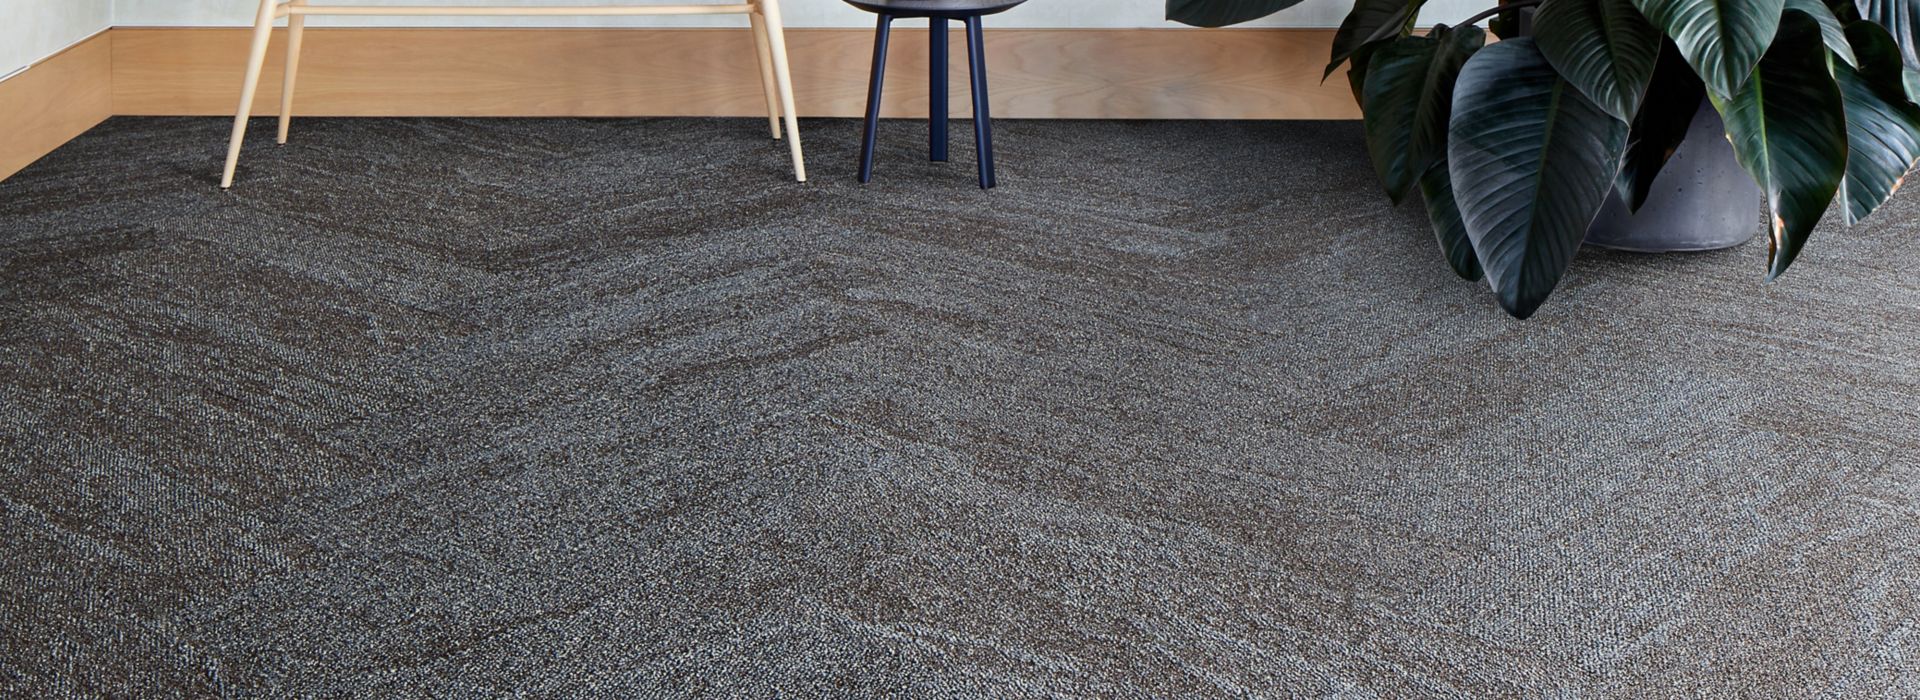 Interface Mesa plank carpet tile  in a lobby with seating and large plant numéro d’image 1